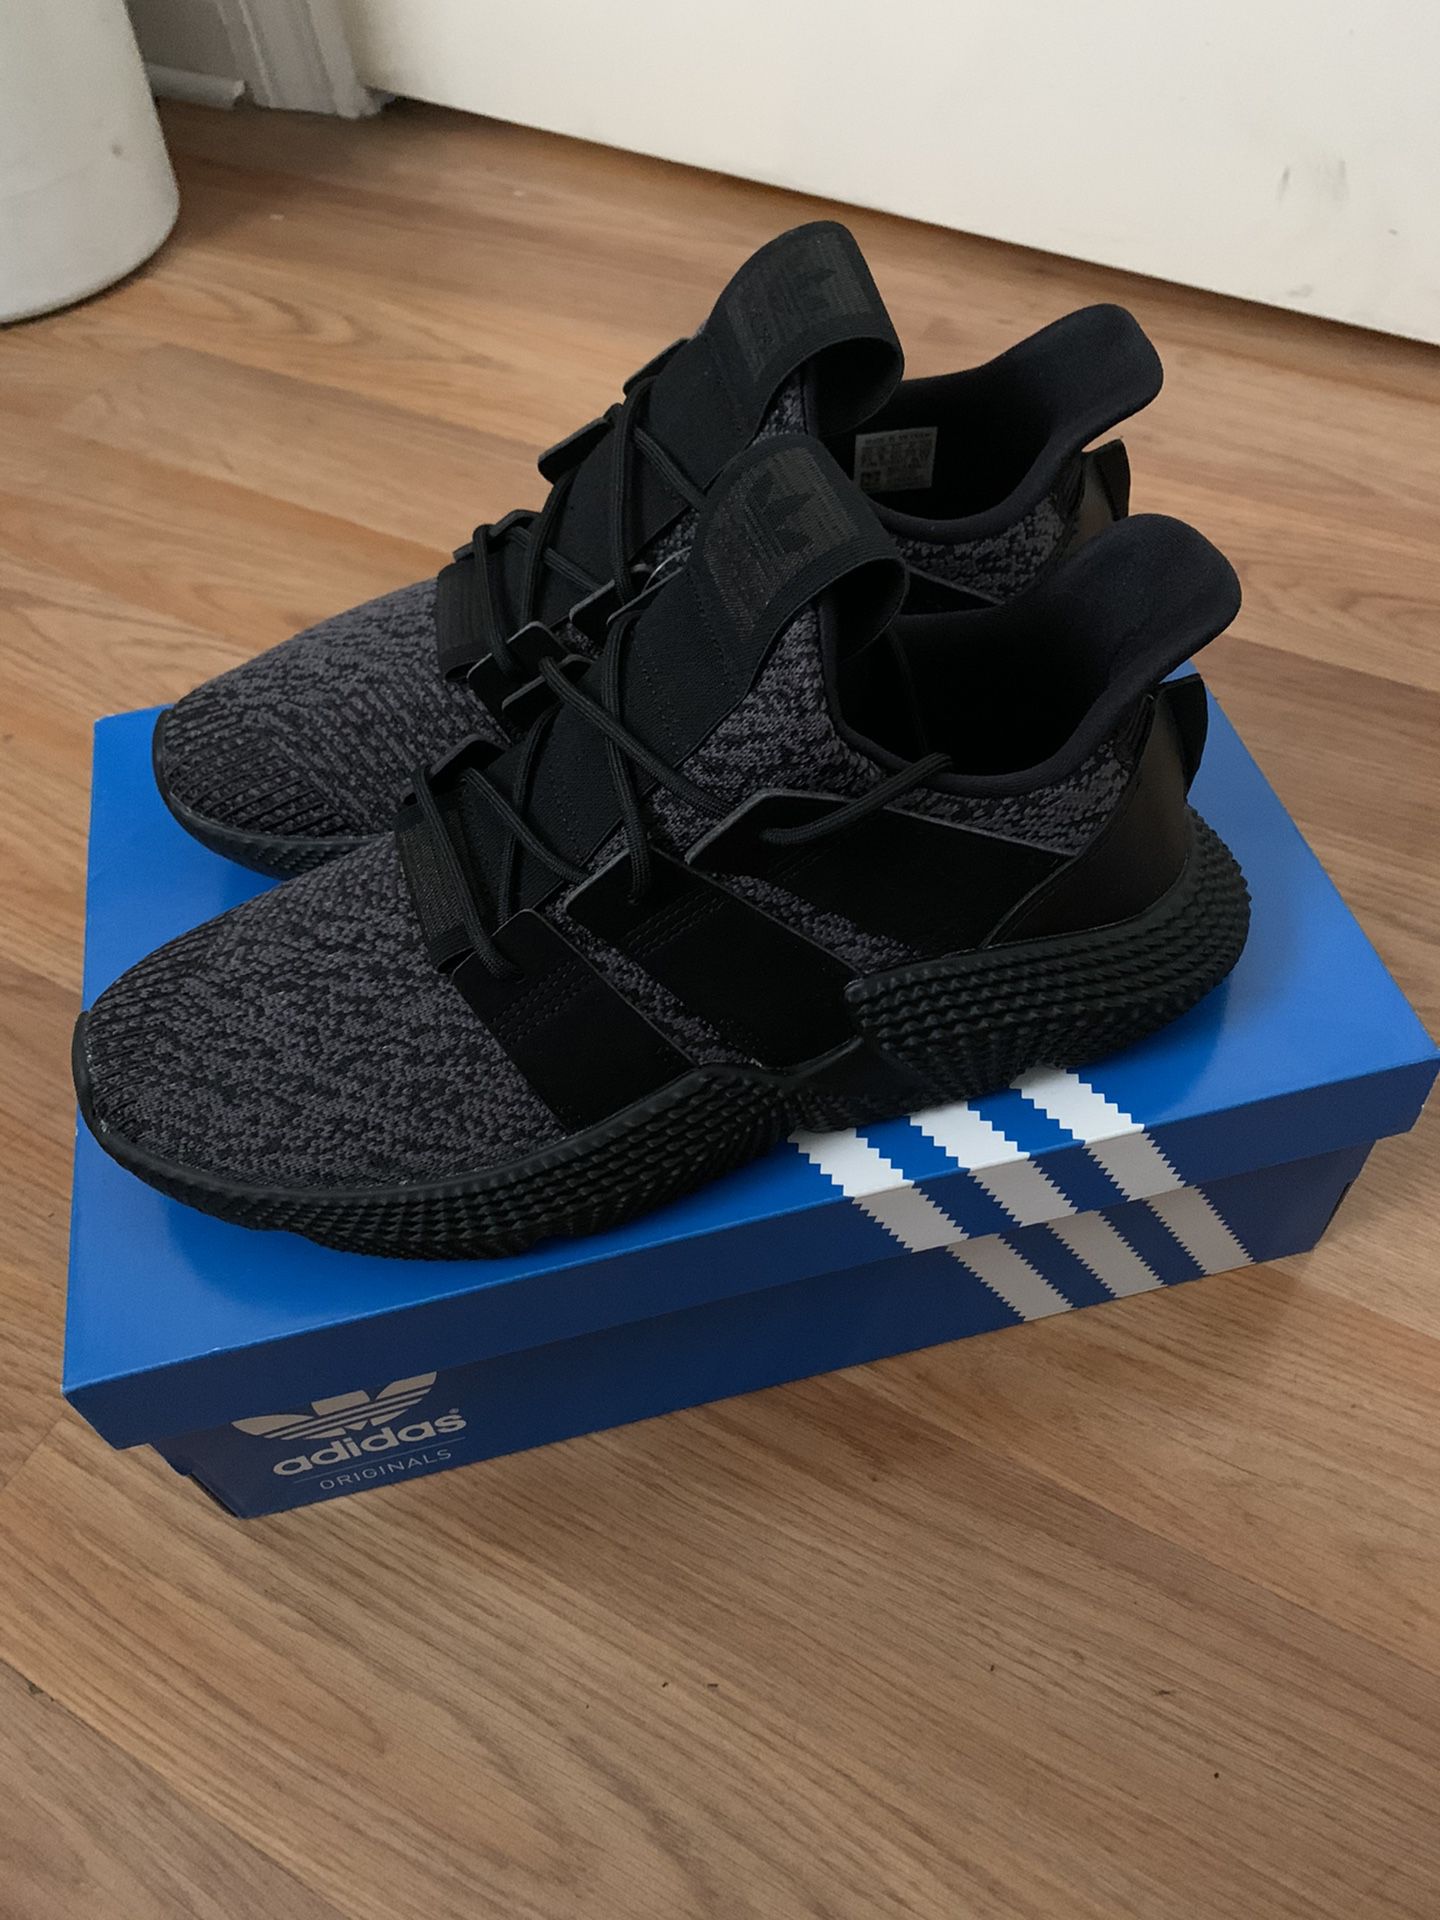 Adidas Prophere SZ 9.5 MENs For SALE NOW!